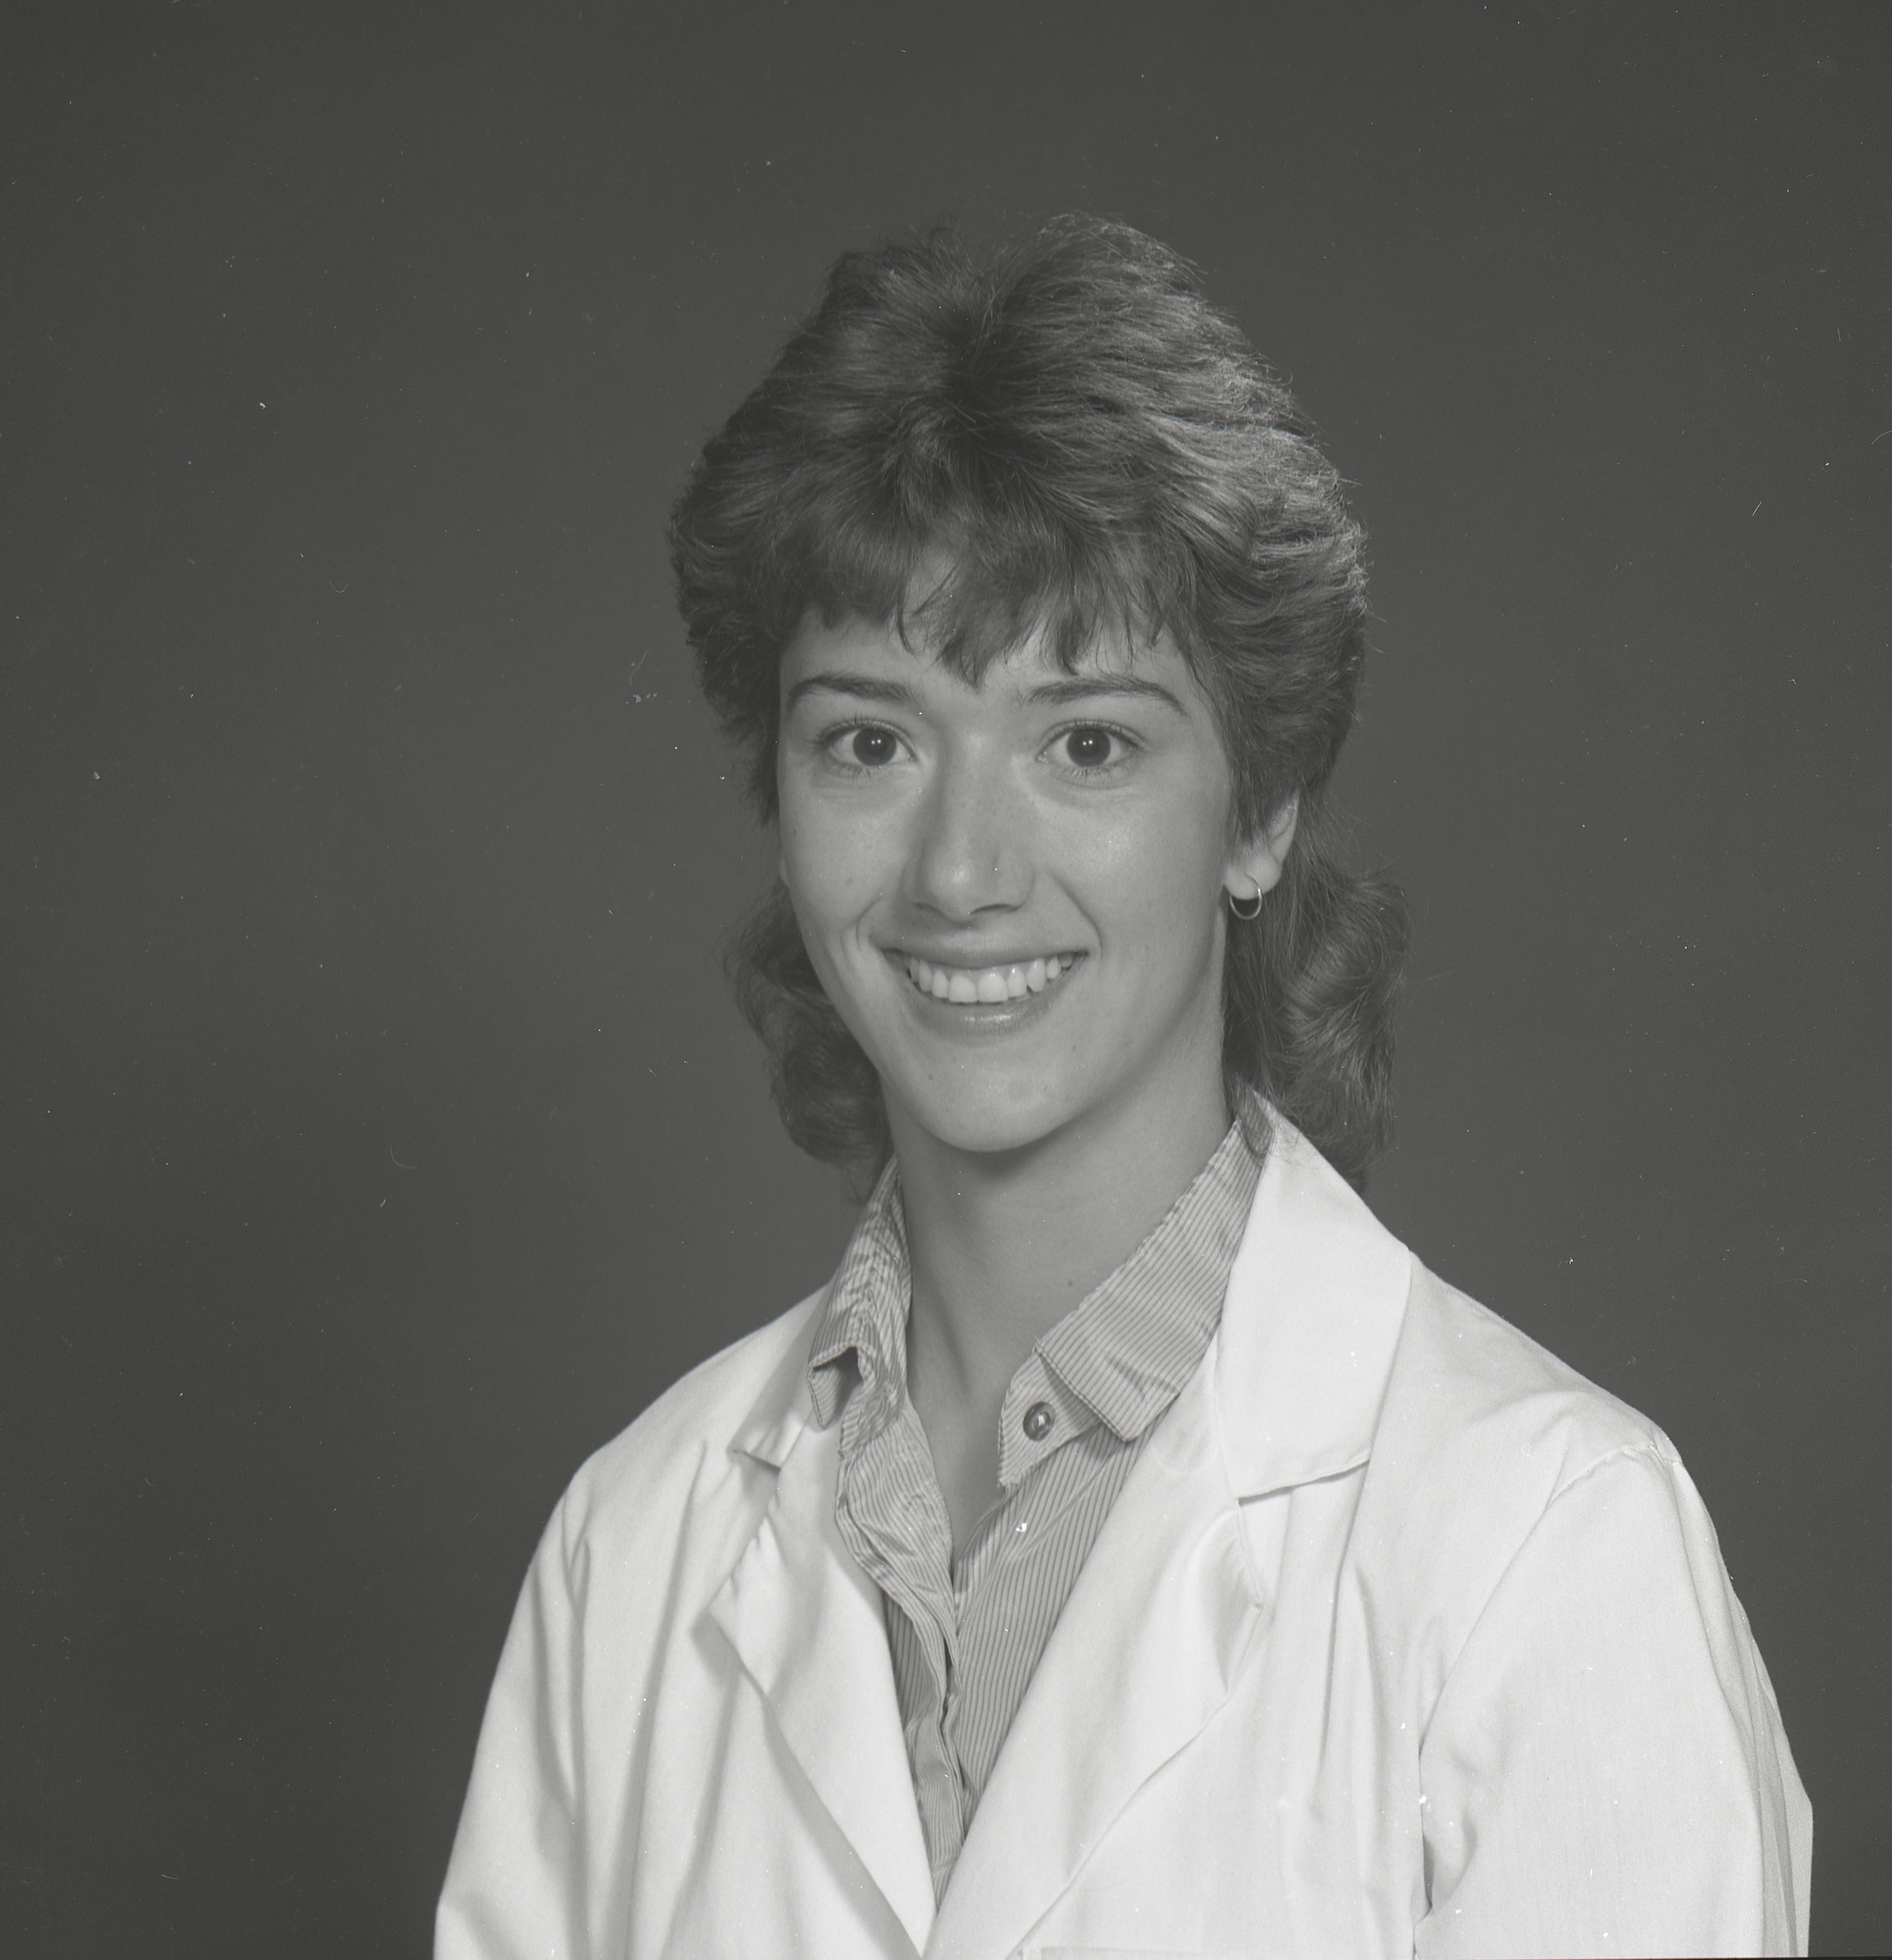 Monica Bertagnolli, MD, in the mid-1980s when she was a U medical student.